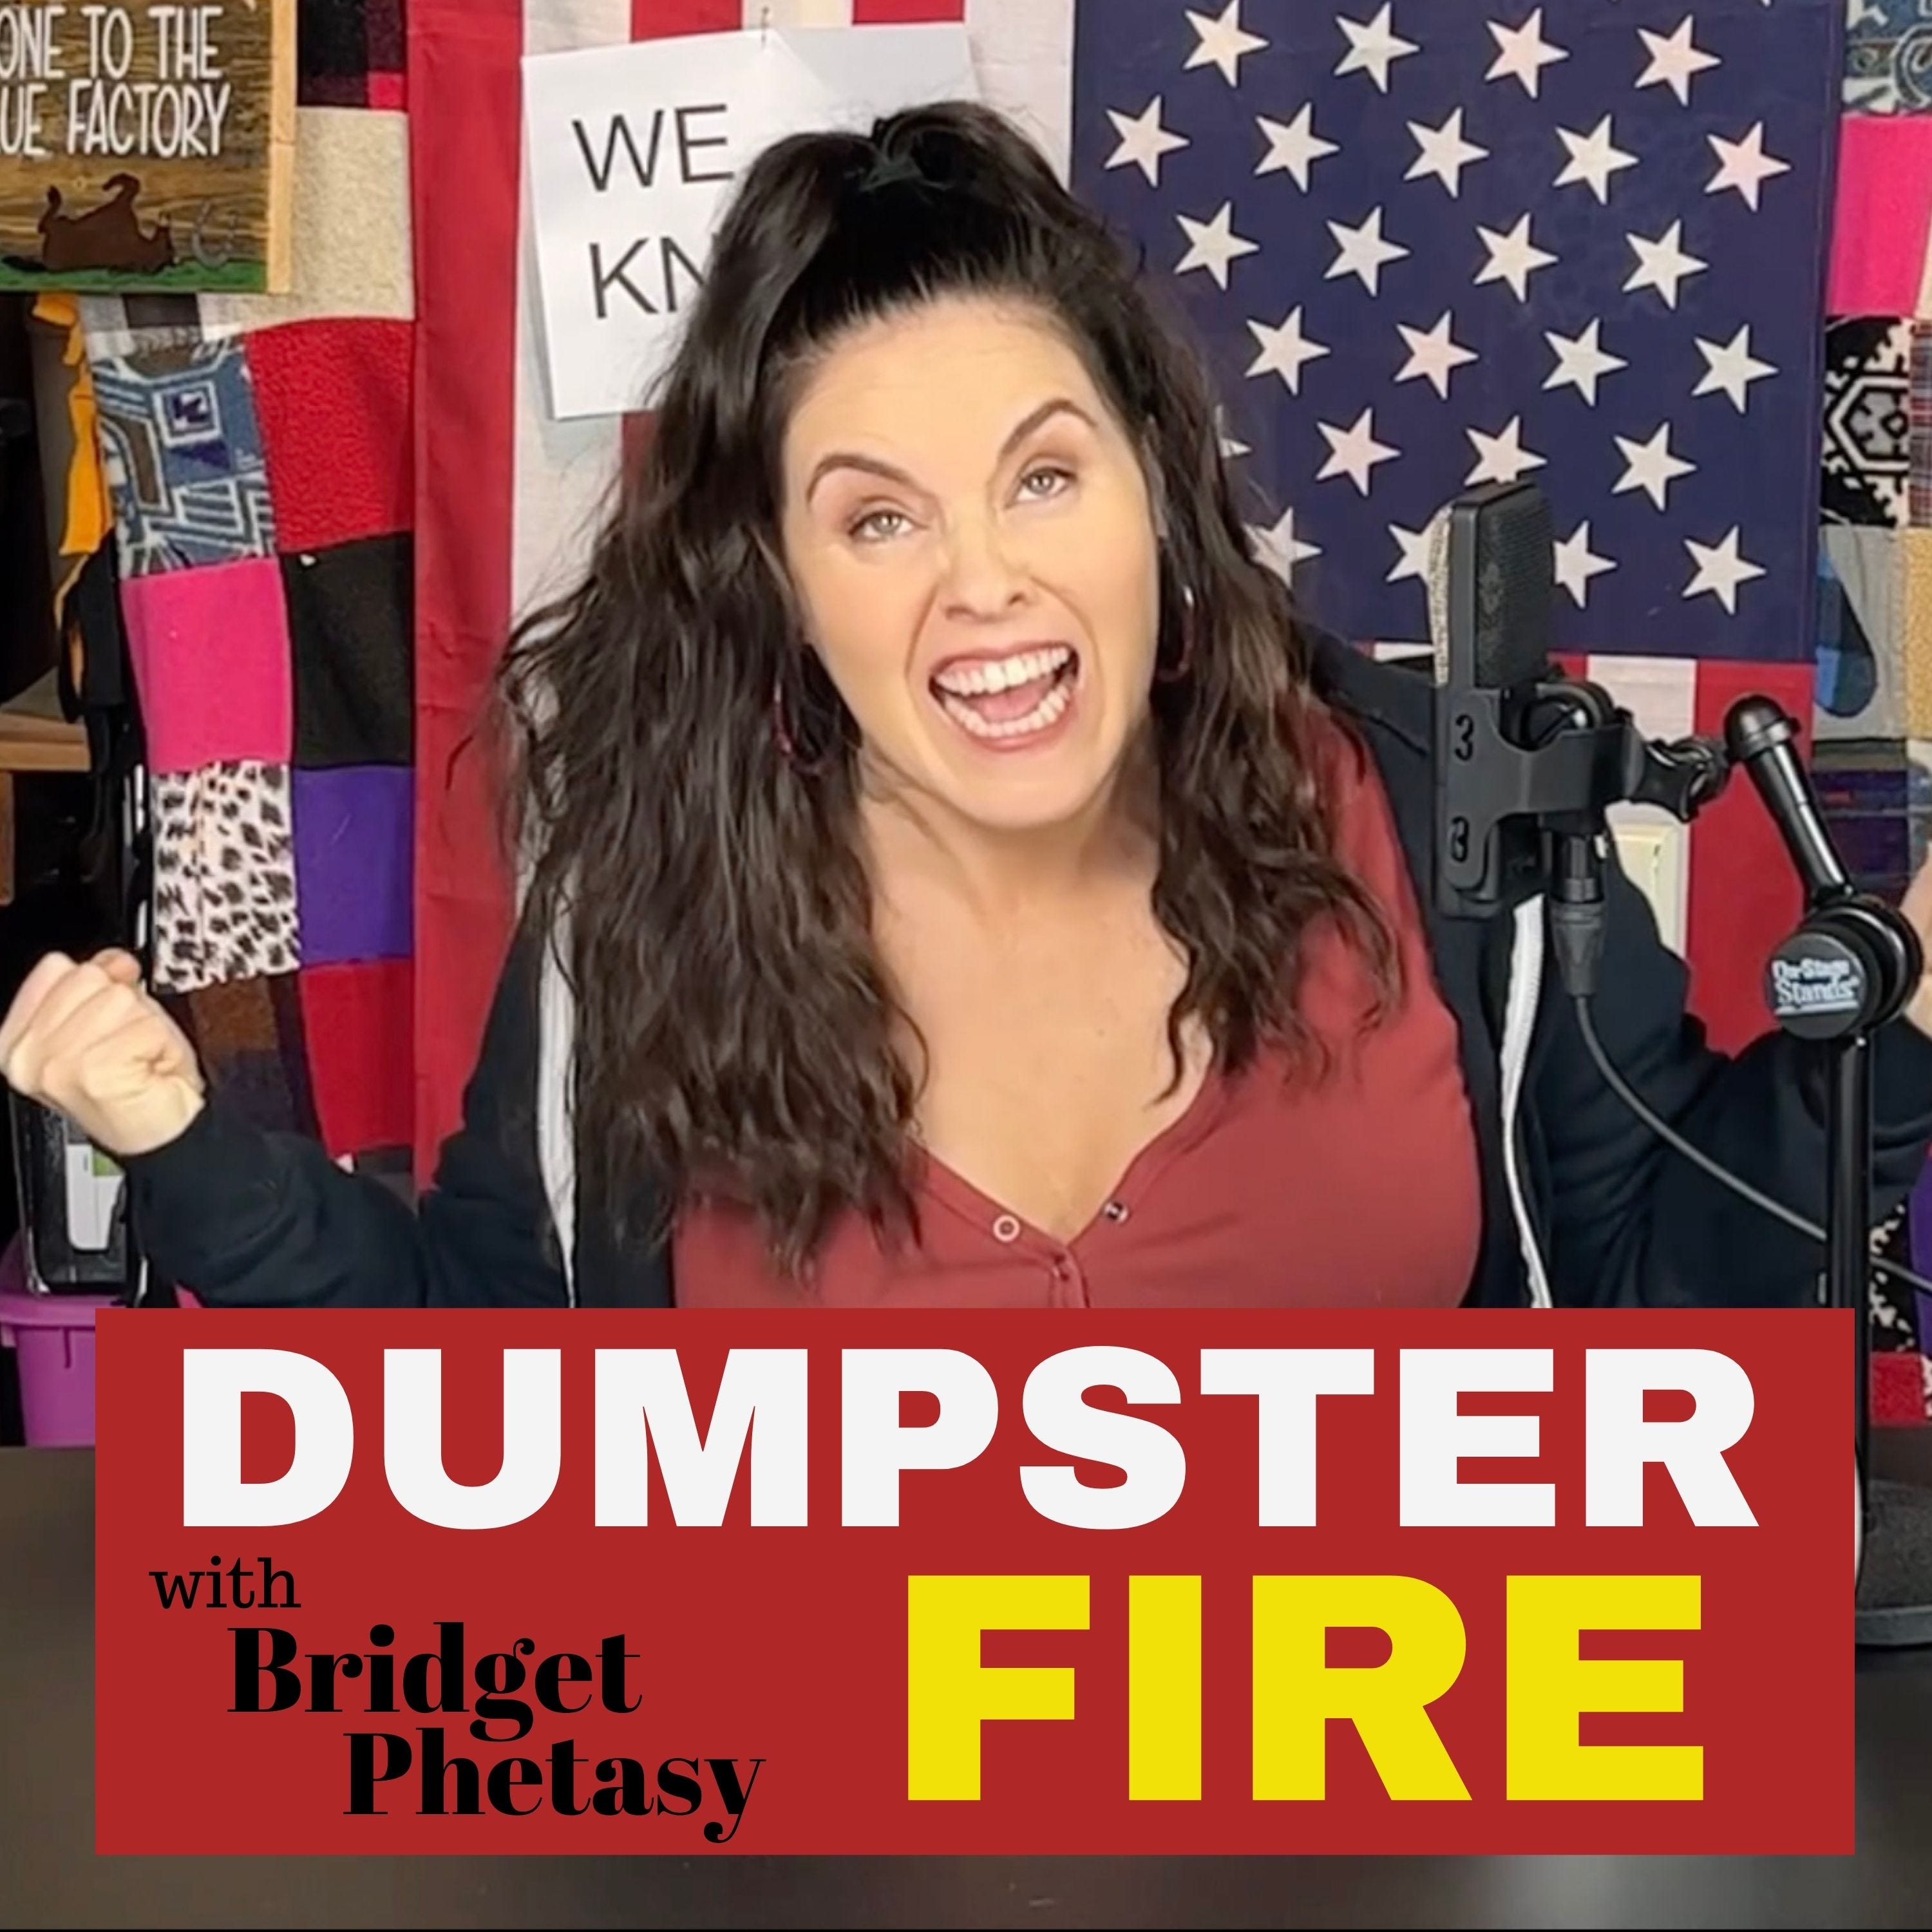 Dumpster Fire 80 - The Pearl Harbor of Dumpster Fires